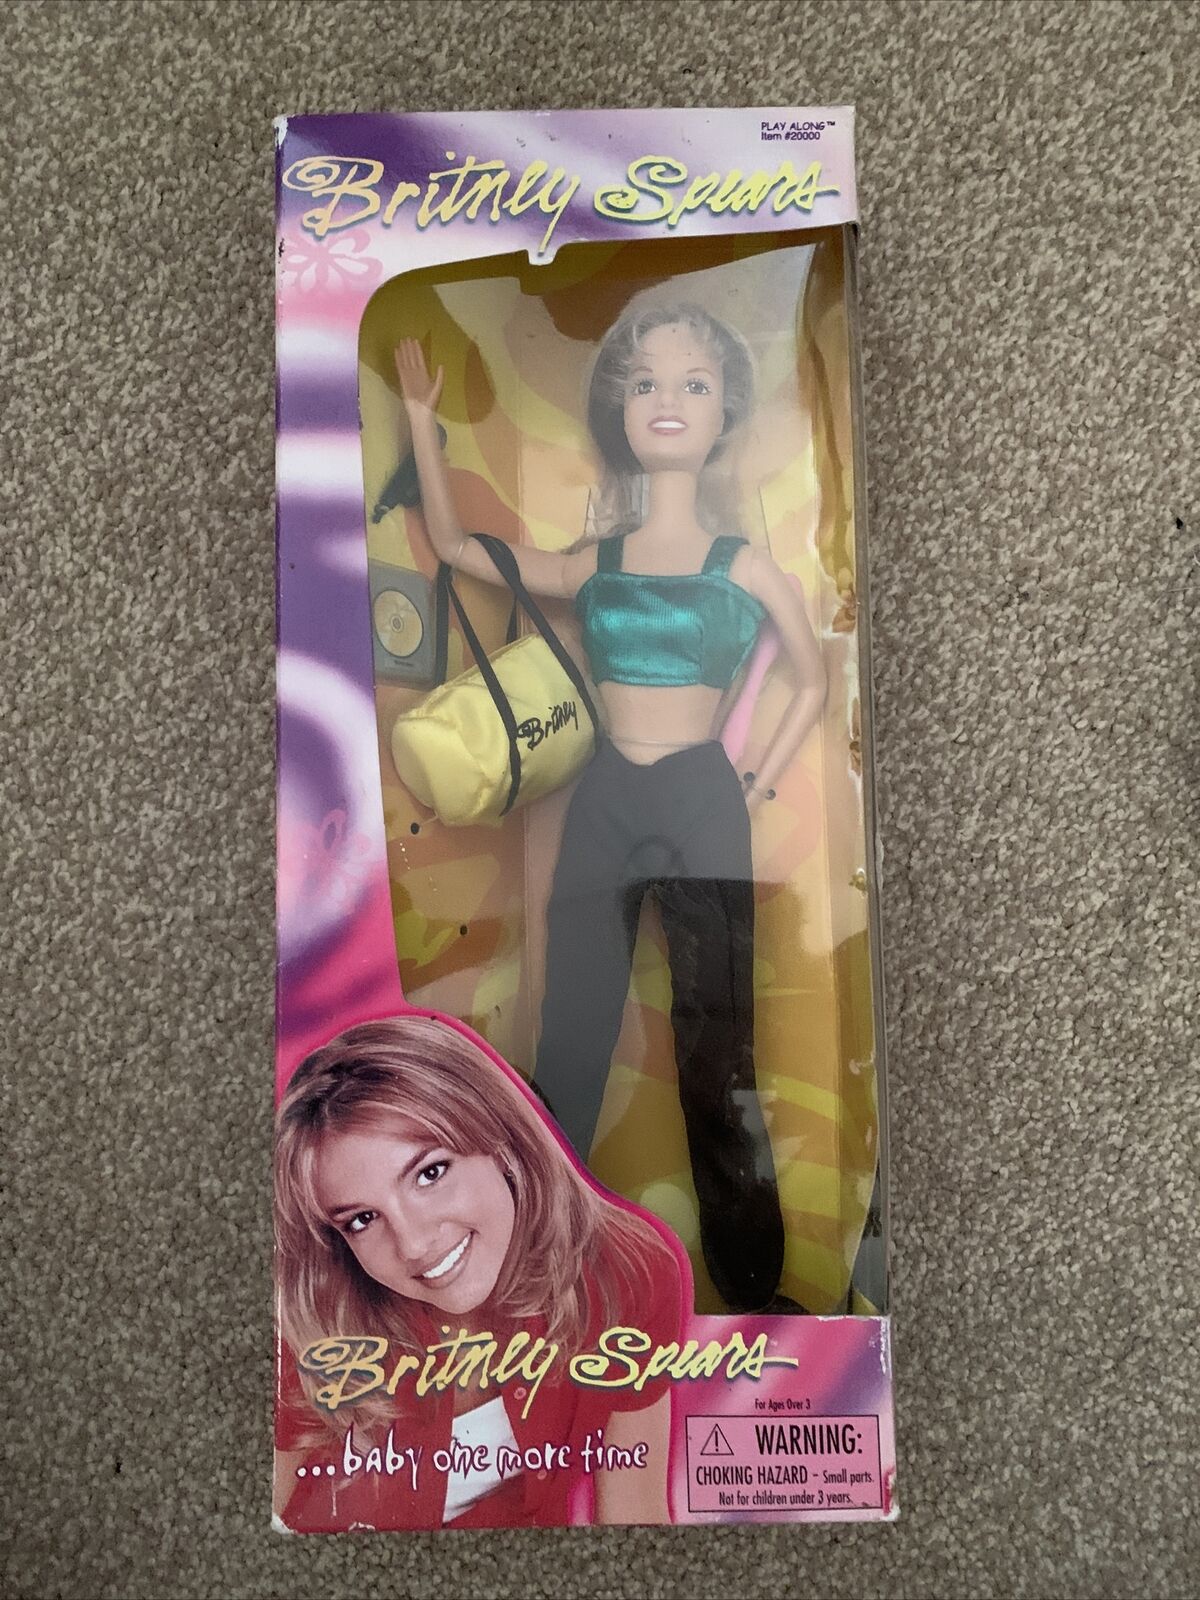 Britney Spears Doll - You Drive Green Top Inventory cleanup selling sale Super intense SALE Outfit Crazy Me Vi